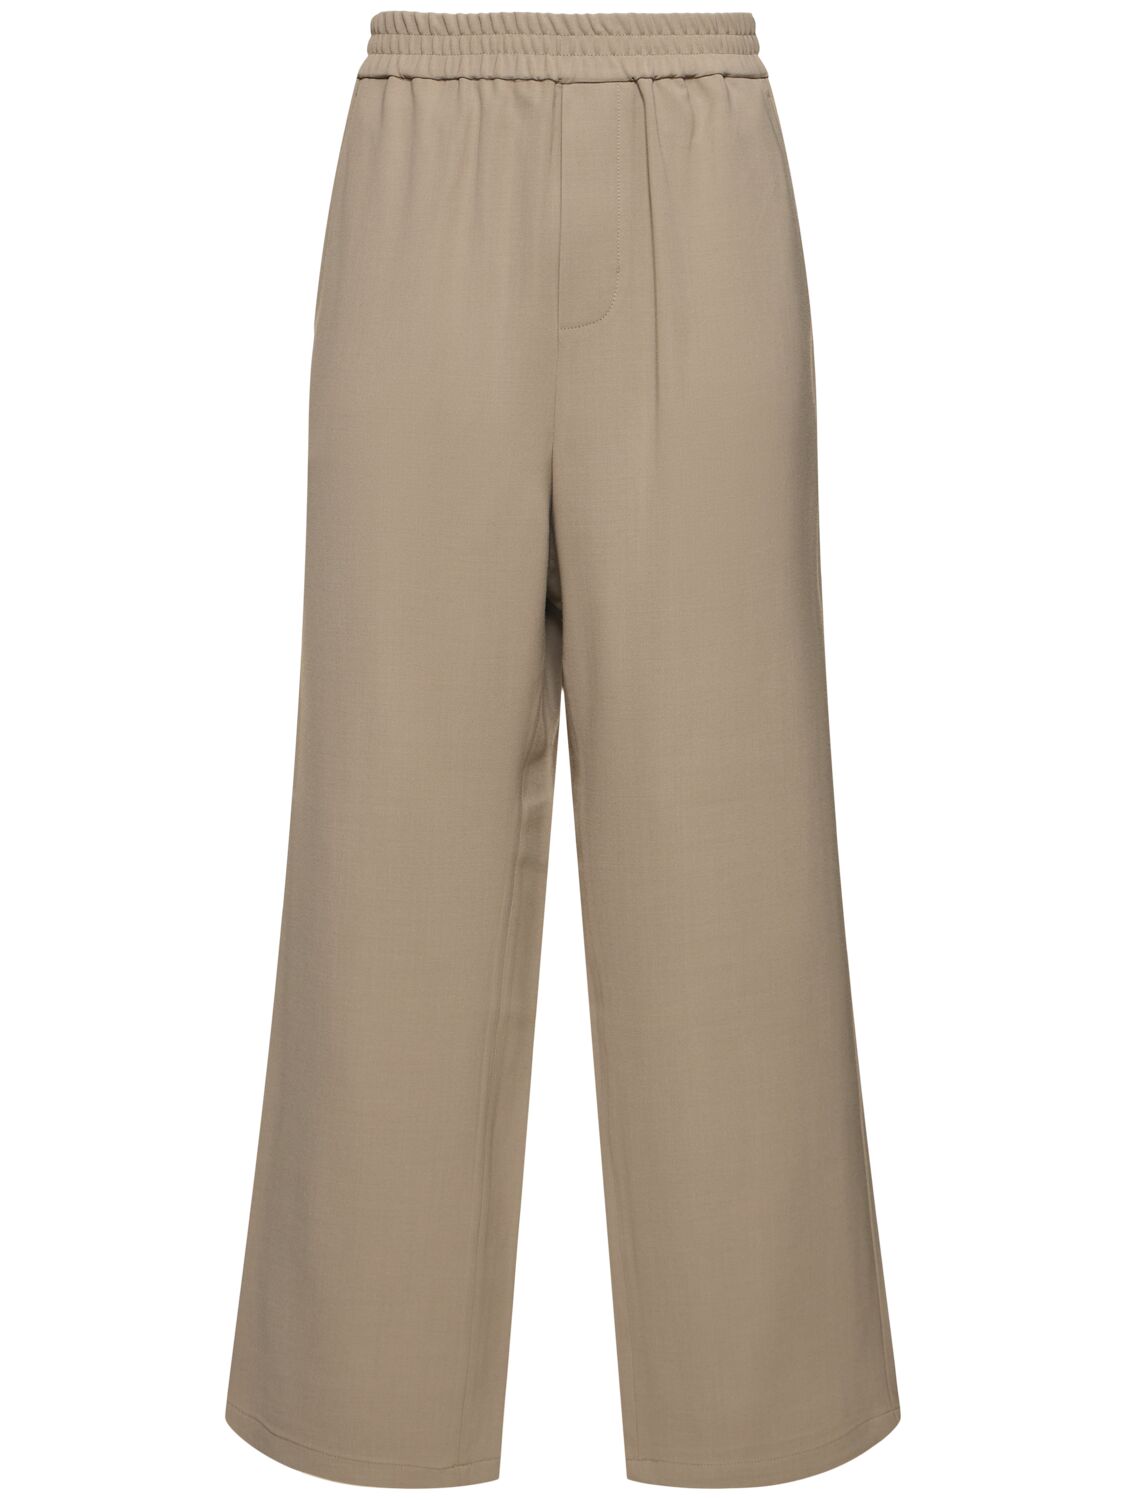 Ami Alexandre Mattiussi Wool Blend Wide Pants In Light Taupe